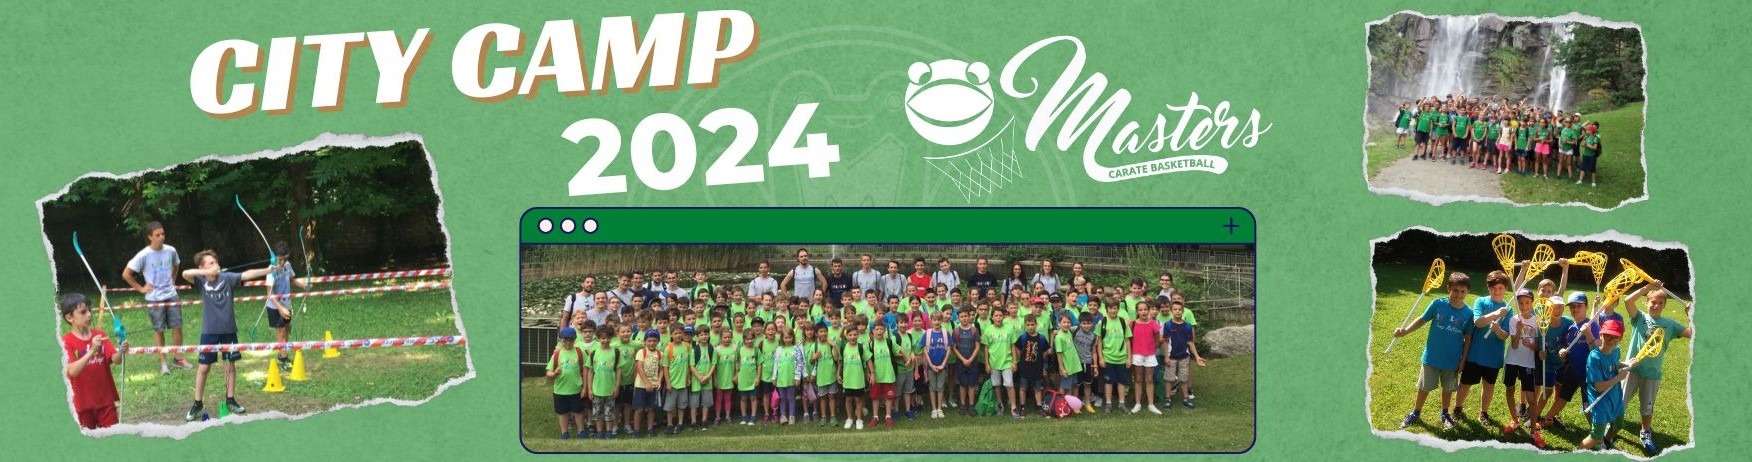 City Camp Masters 2024